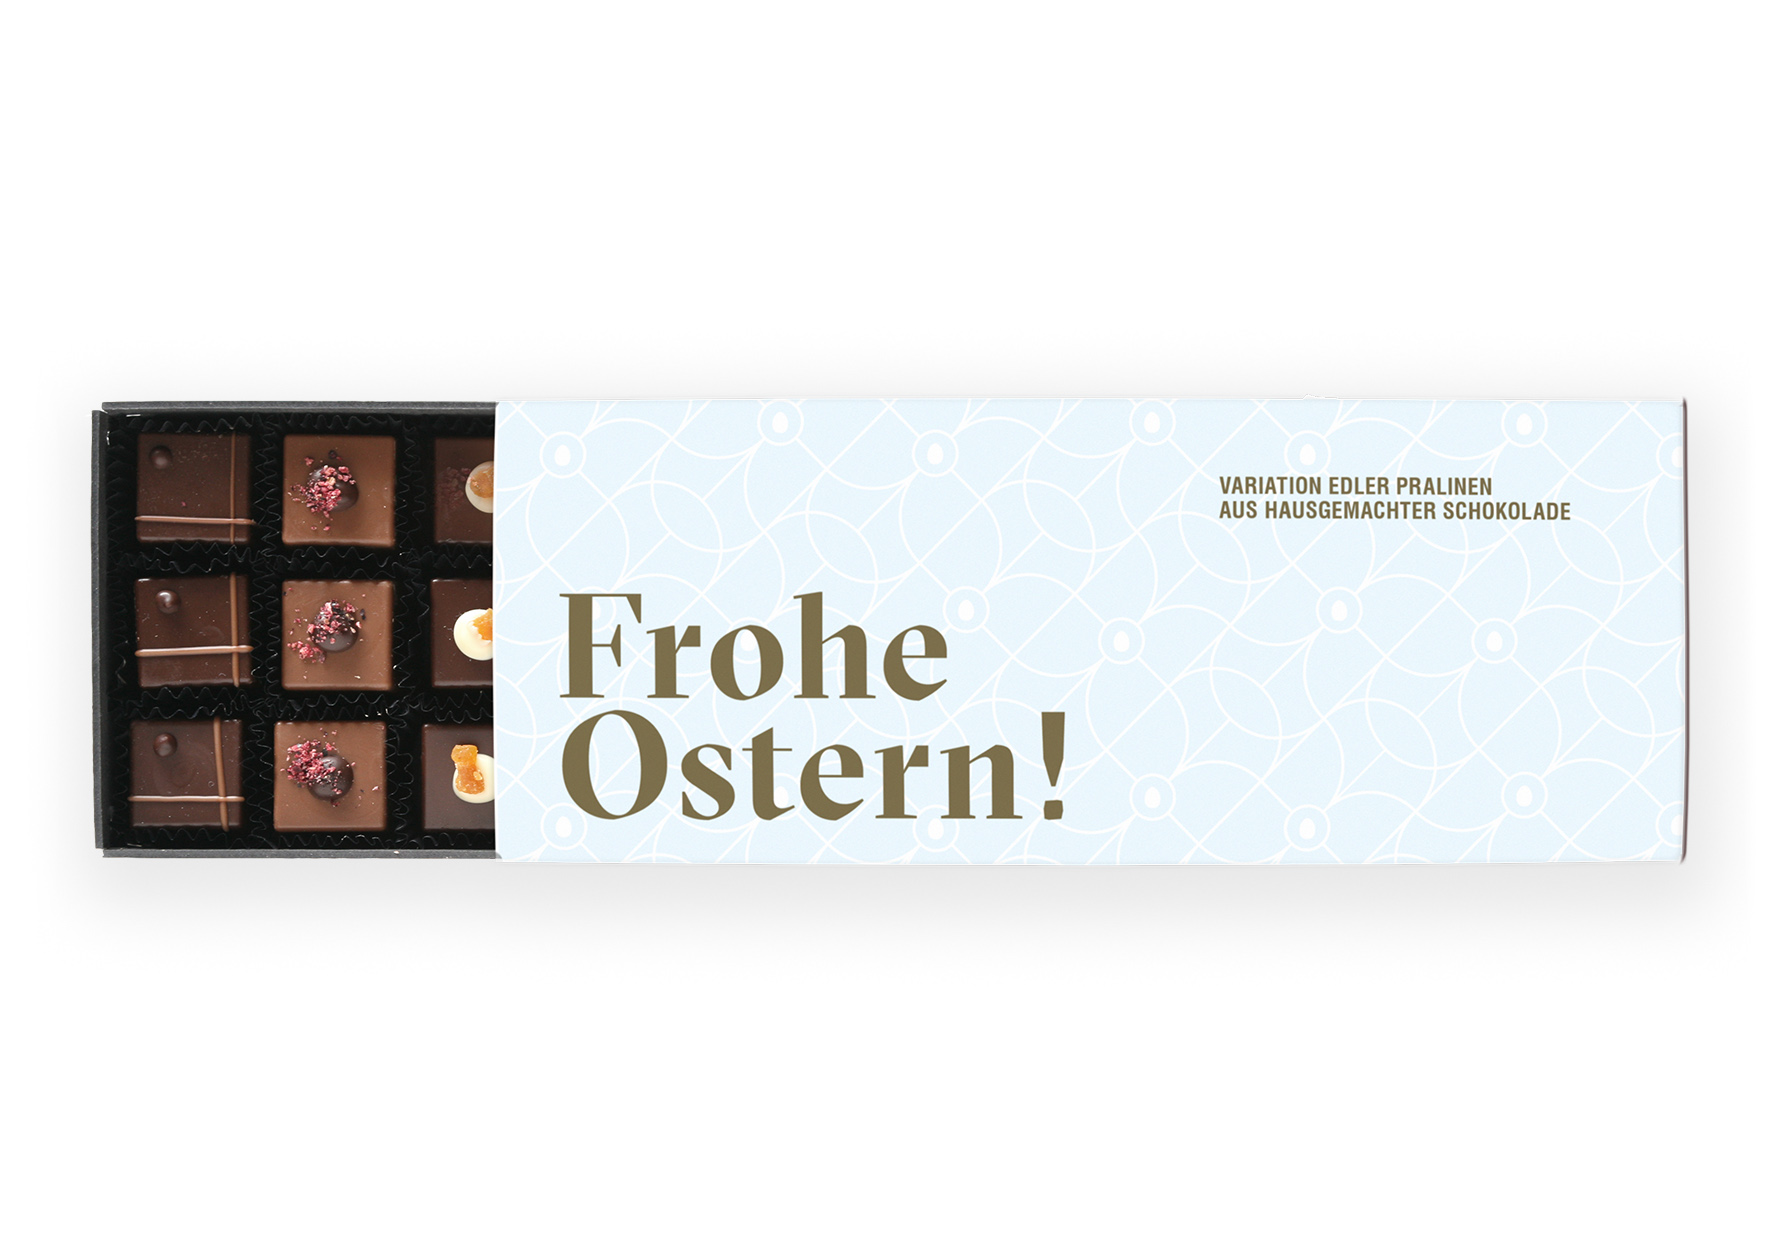 Edition 24 "Frohe Ostern"